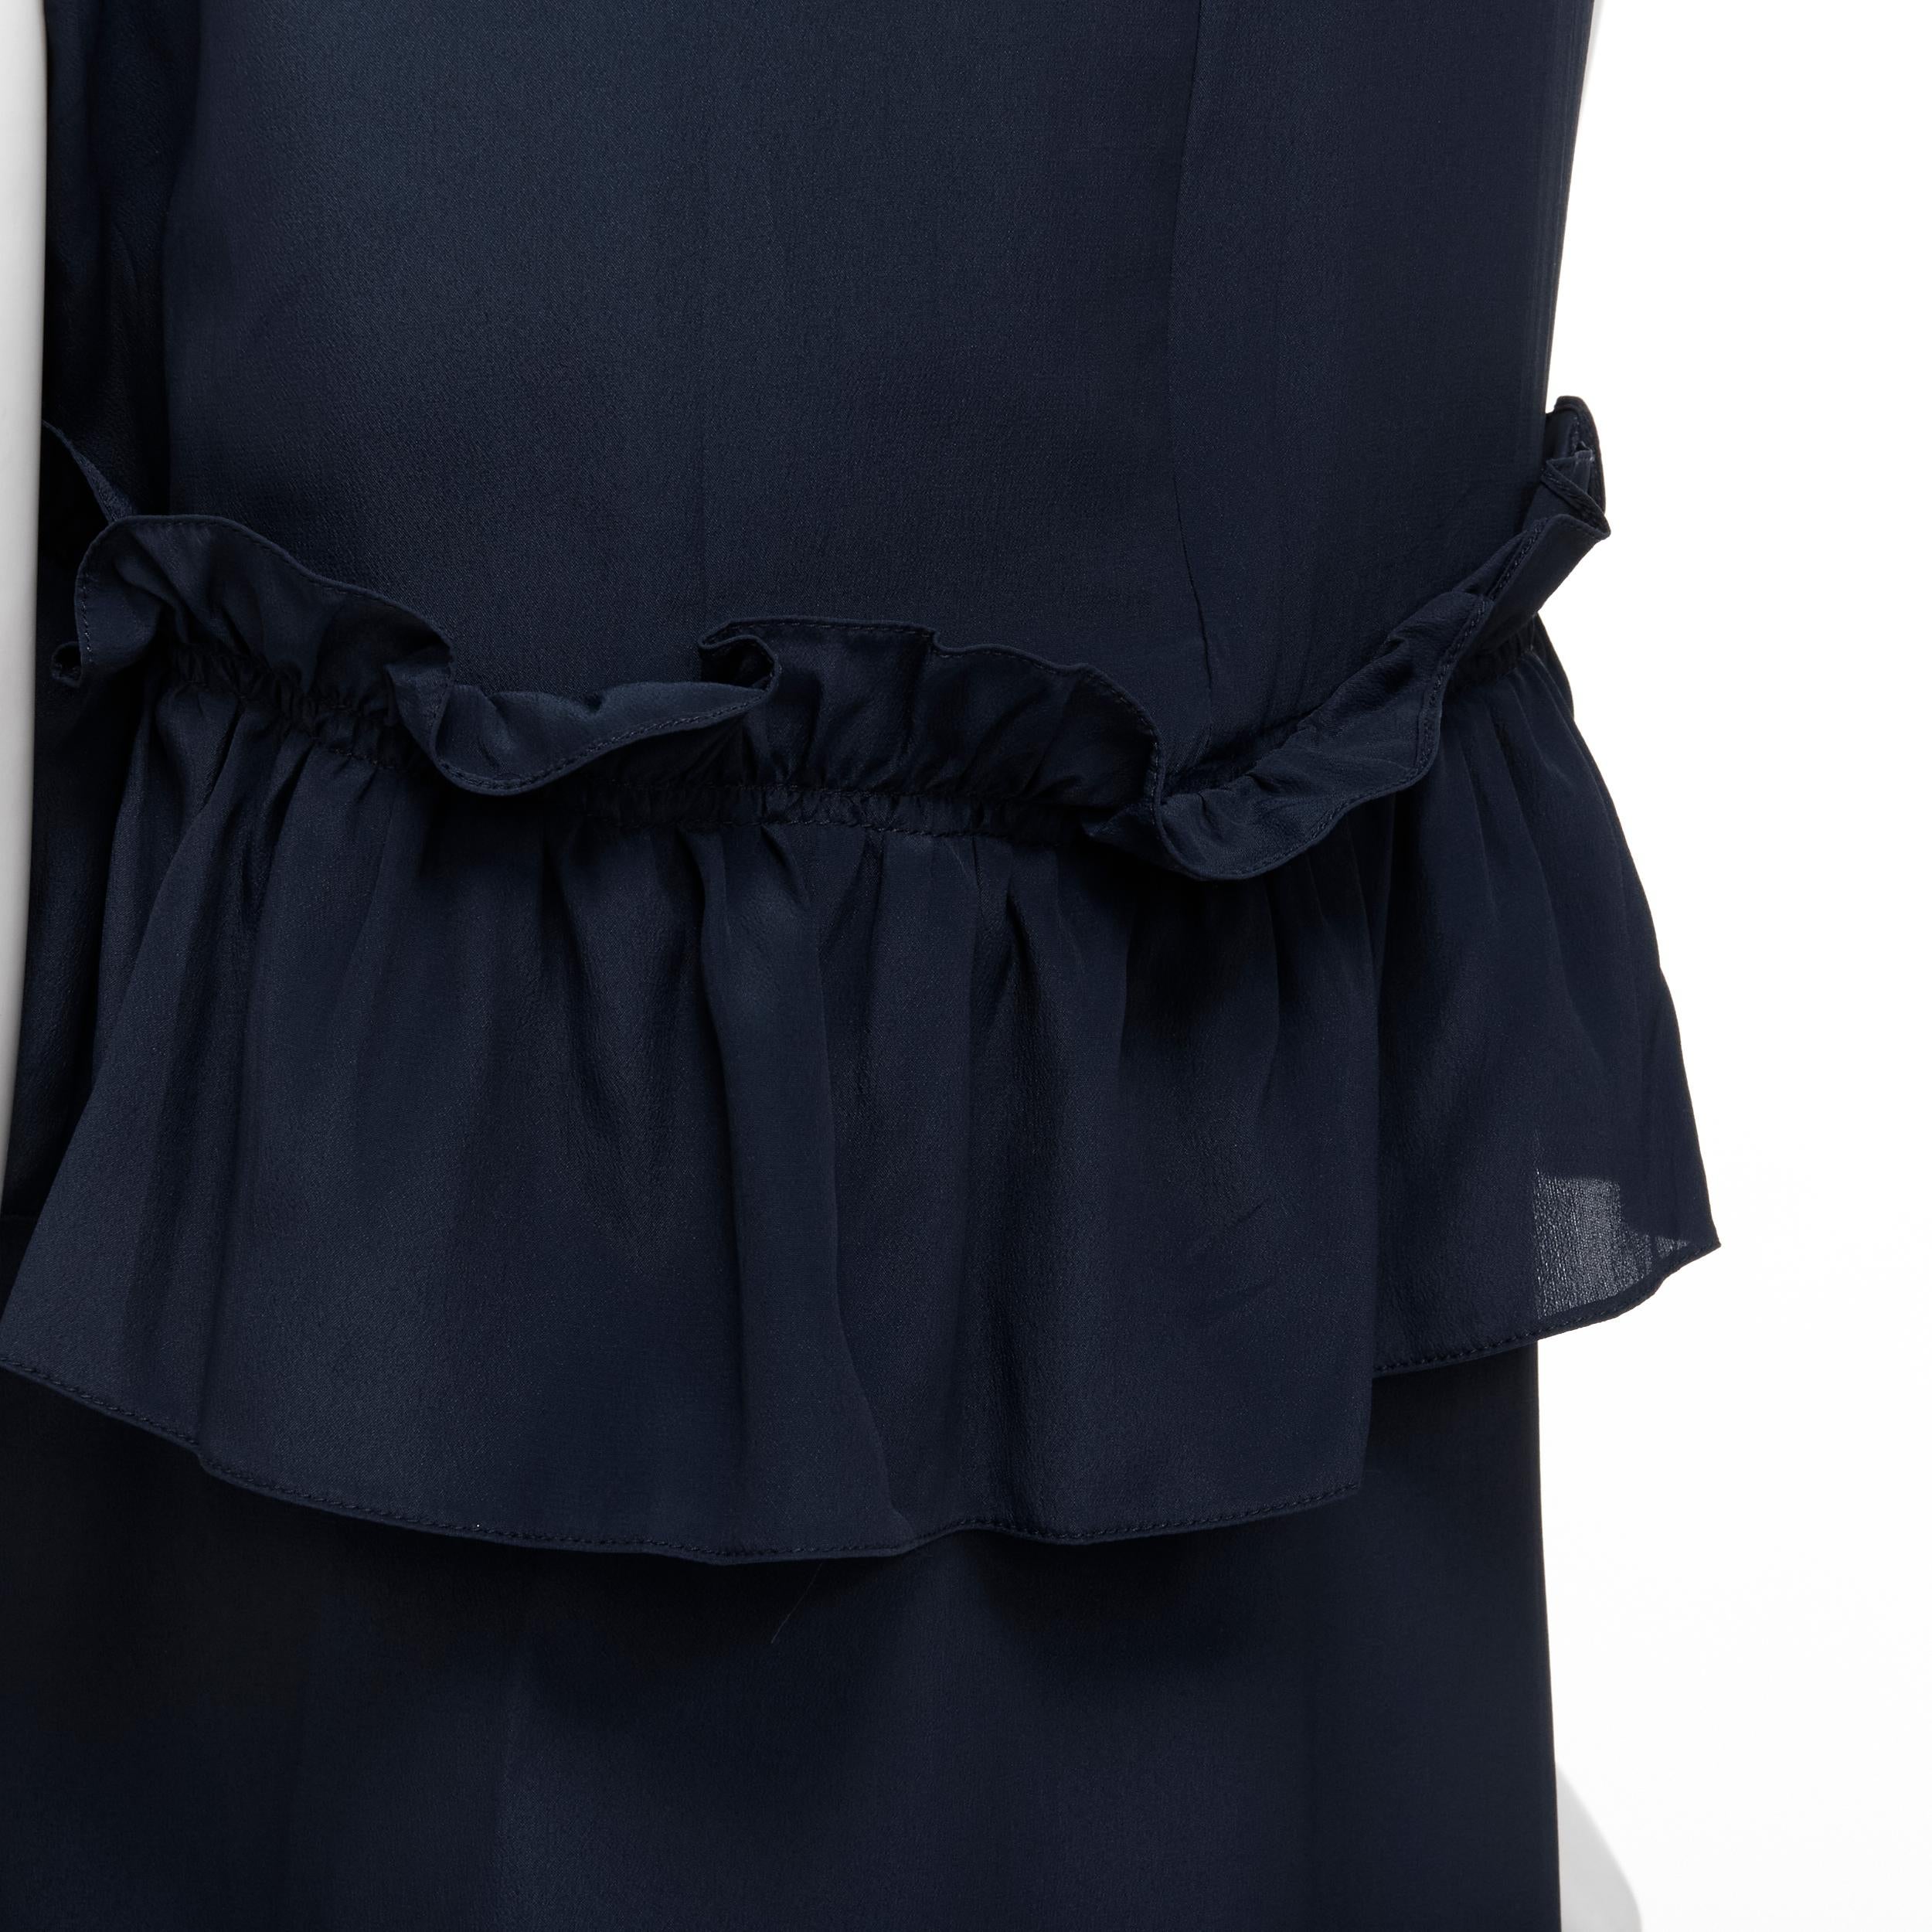 MARNI navy blue silk crepe cross ruffle trim knee lenth dress IT40 S 
Reference: CELG/A00190 
Brand: Marni 
Material: Silk 
Color: Navy 
Pattern: Solid 
Closure: Zip Extra Detail: Ruffle frill detailing. Dipped back. 
Made in: Italy 

CONDITION: